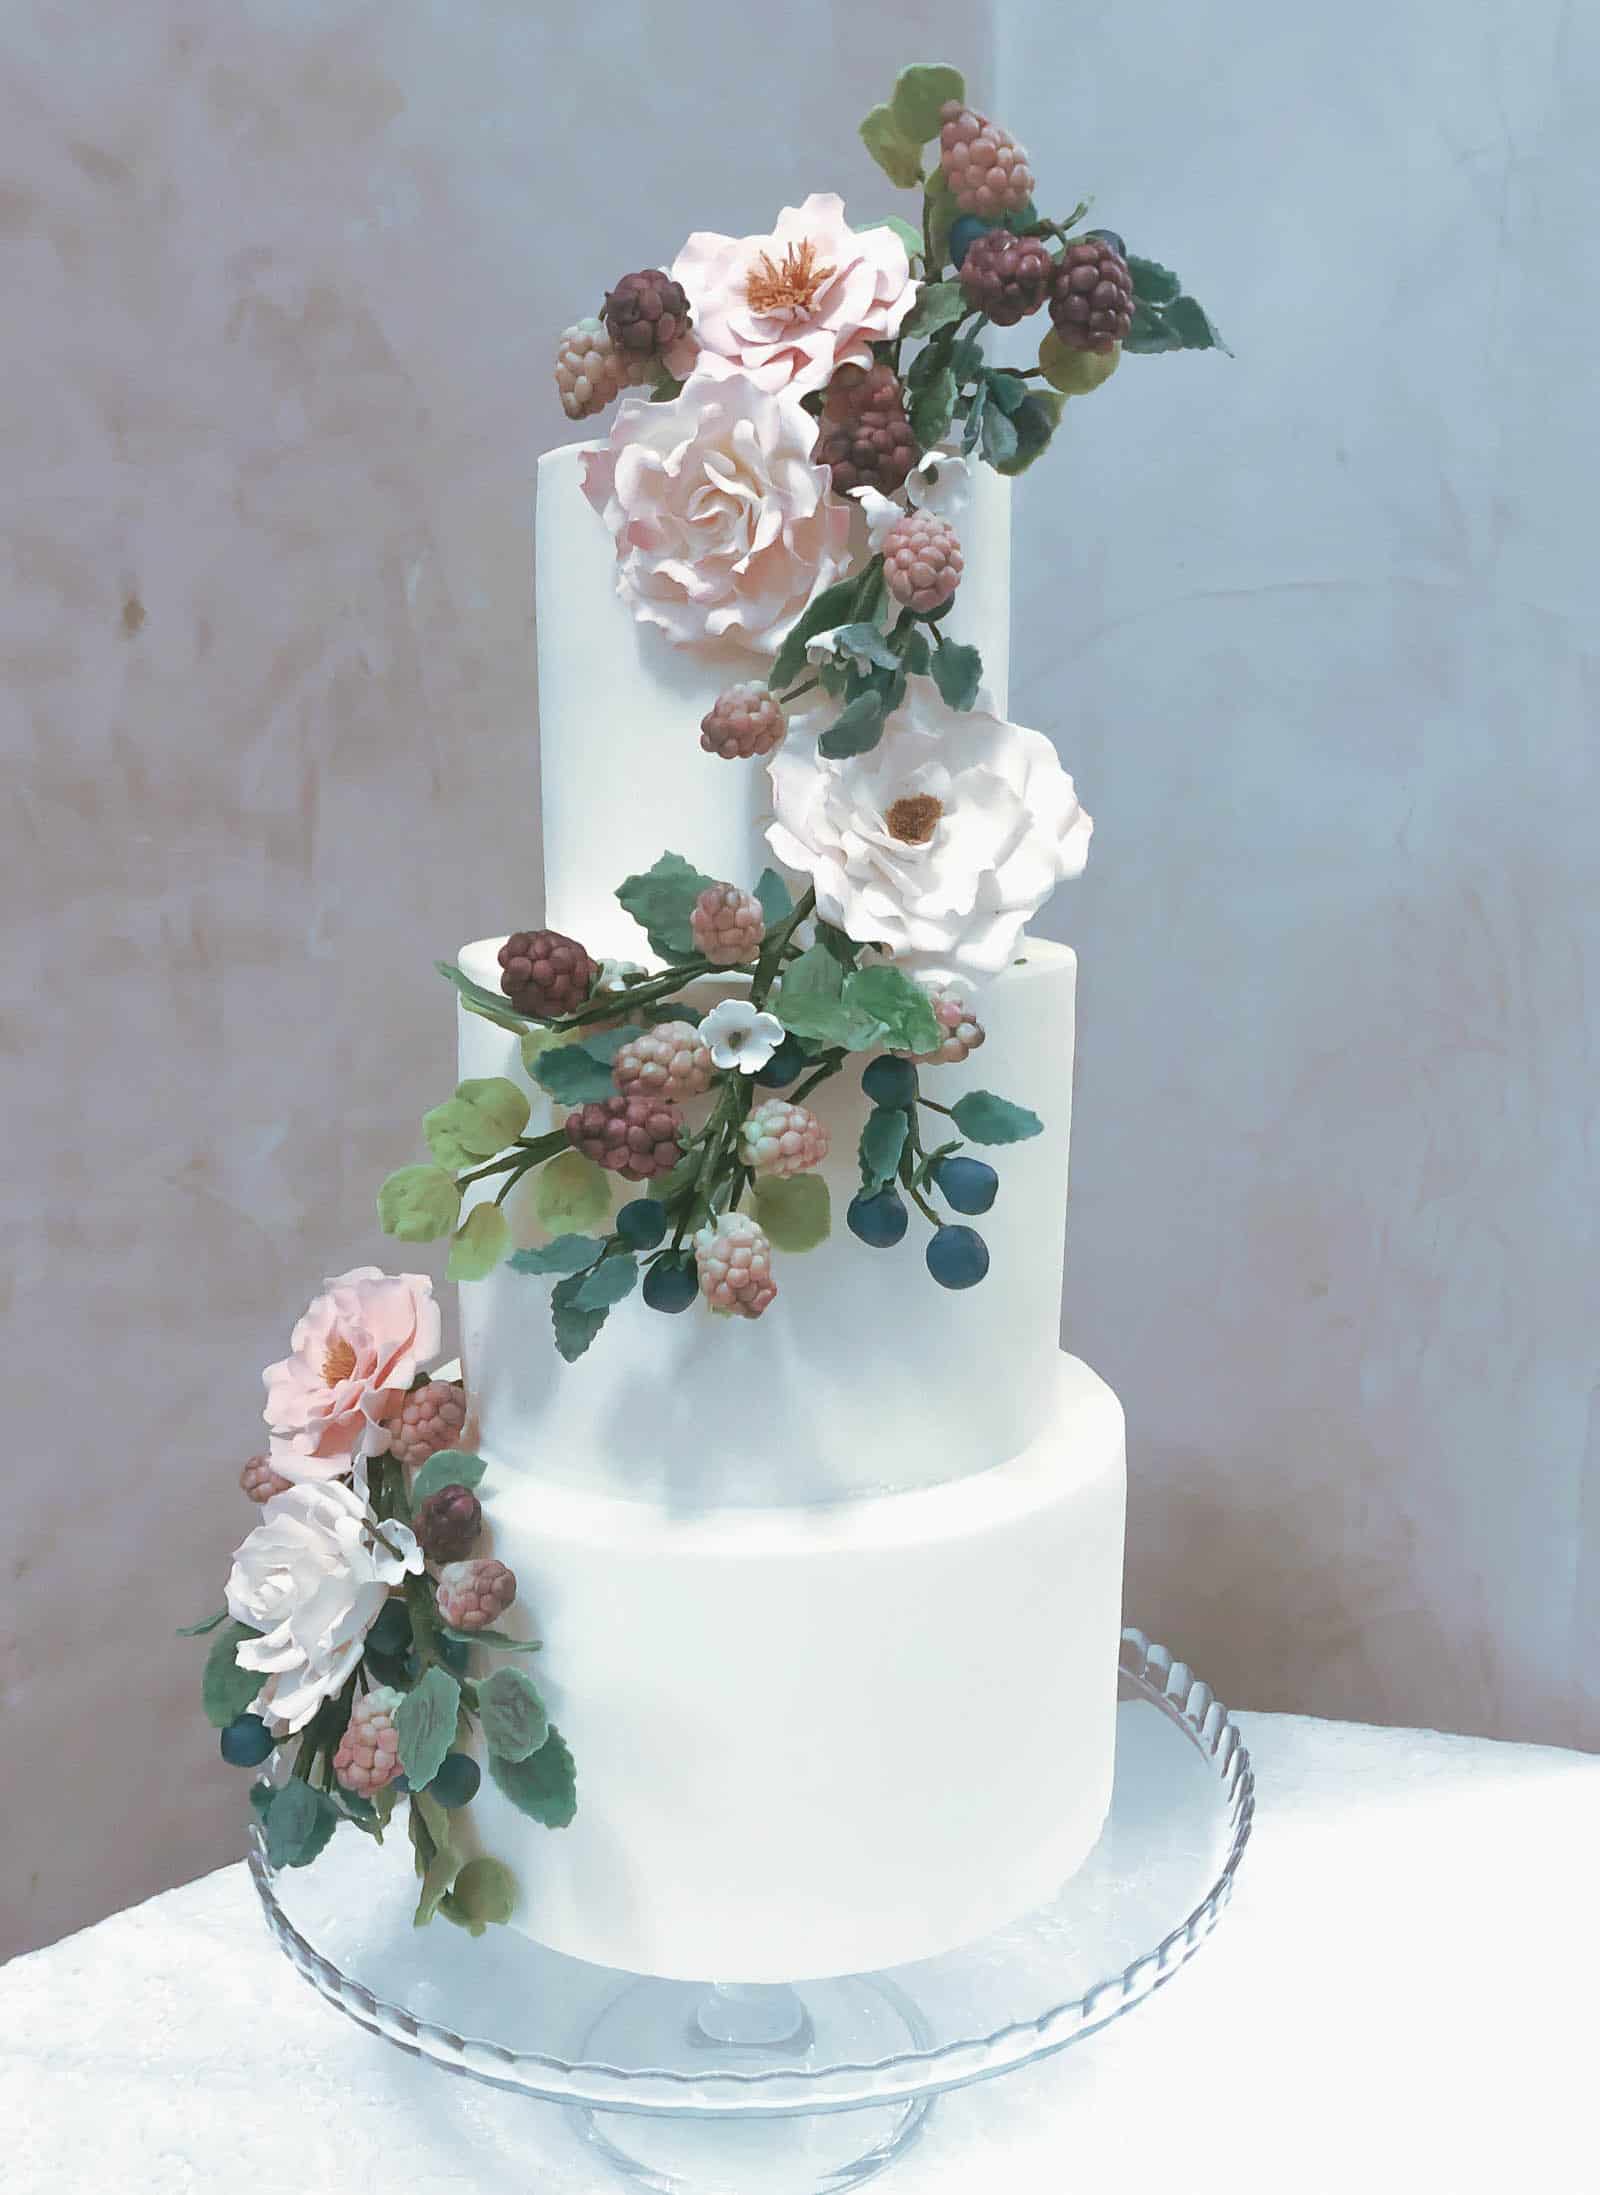 Tuscan Wedding Cakes Wild Berry Tiered Cake at St. Regis Florence